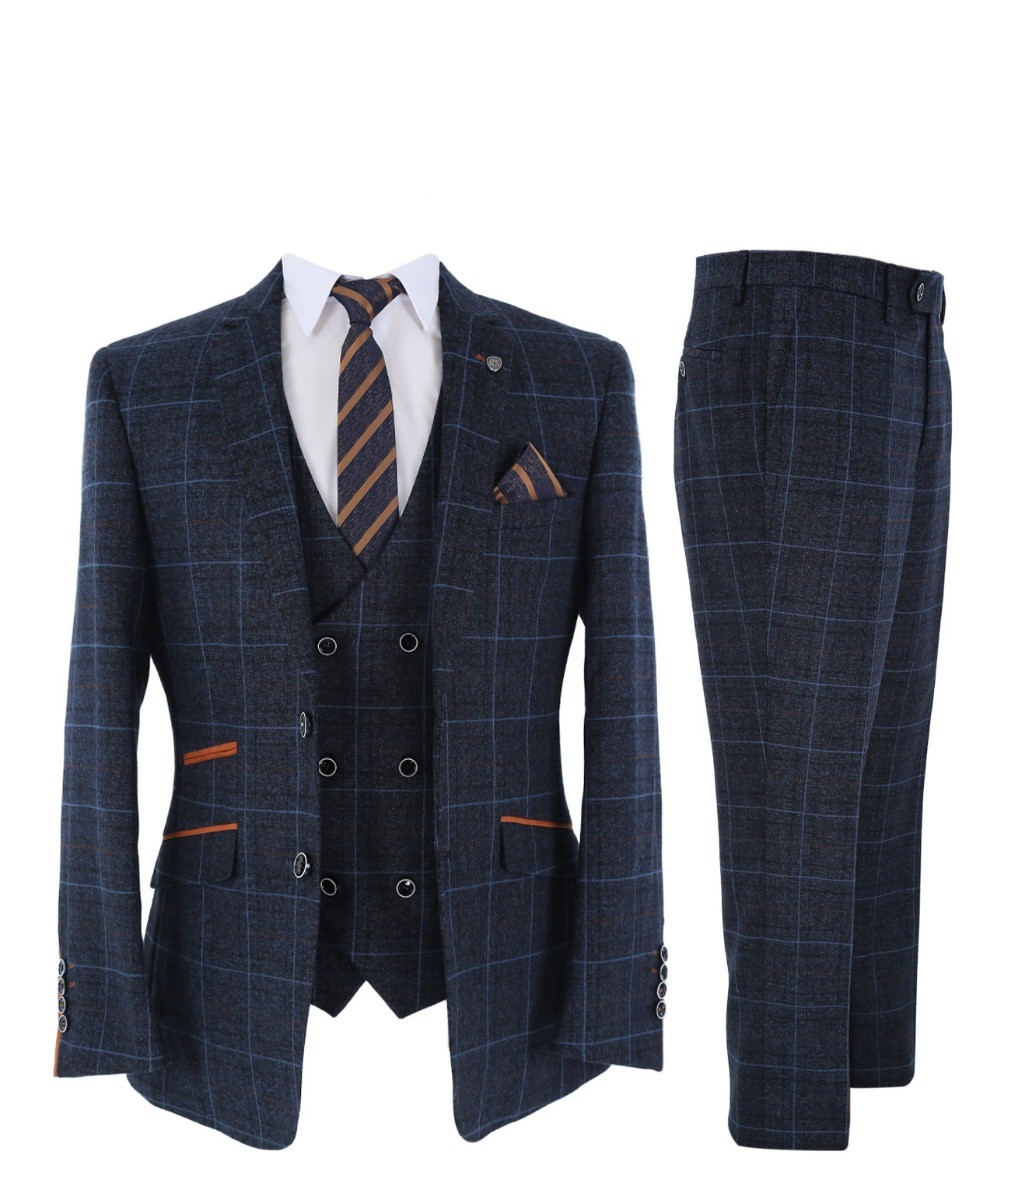 Men's Tailored Fit Retro Check Suit - ANTHONY NAVY - Navy Blue